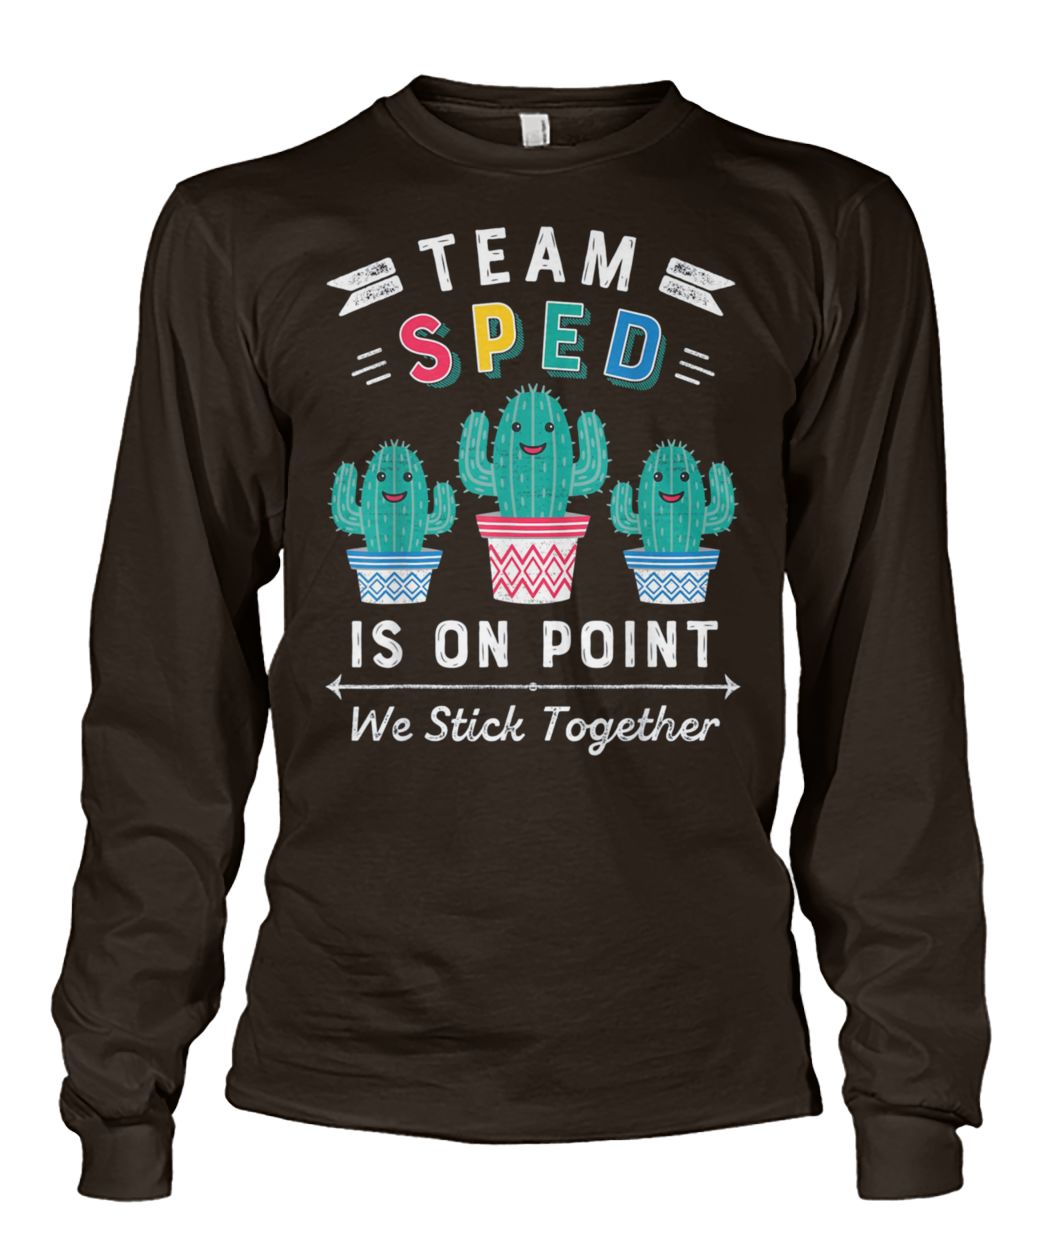 Team sped is on point we stick together unisex long sleeve